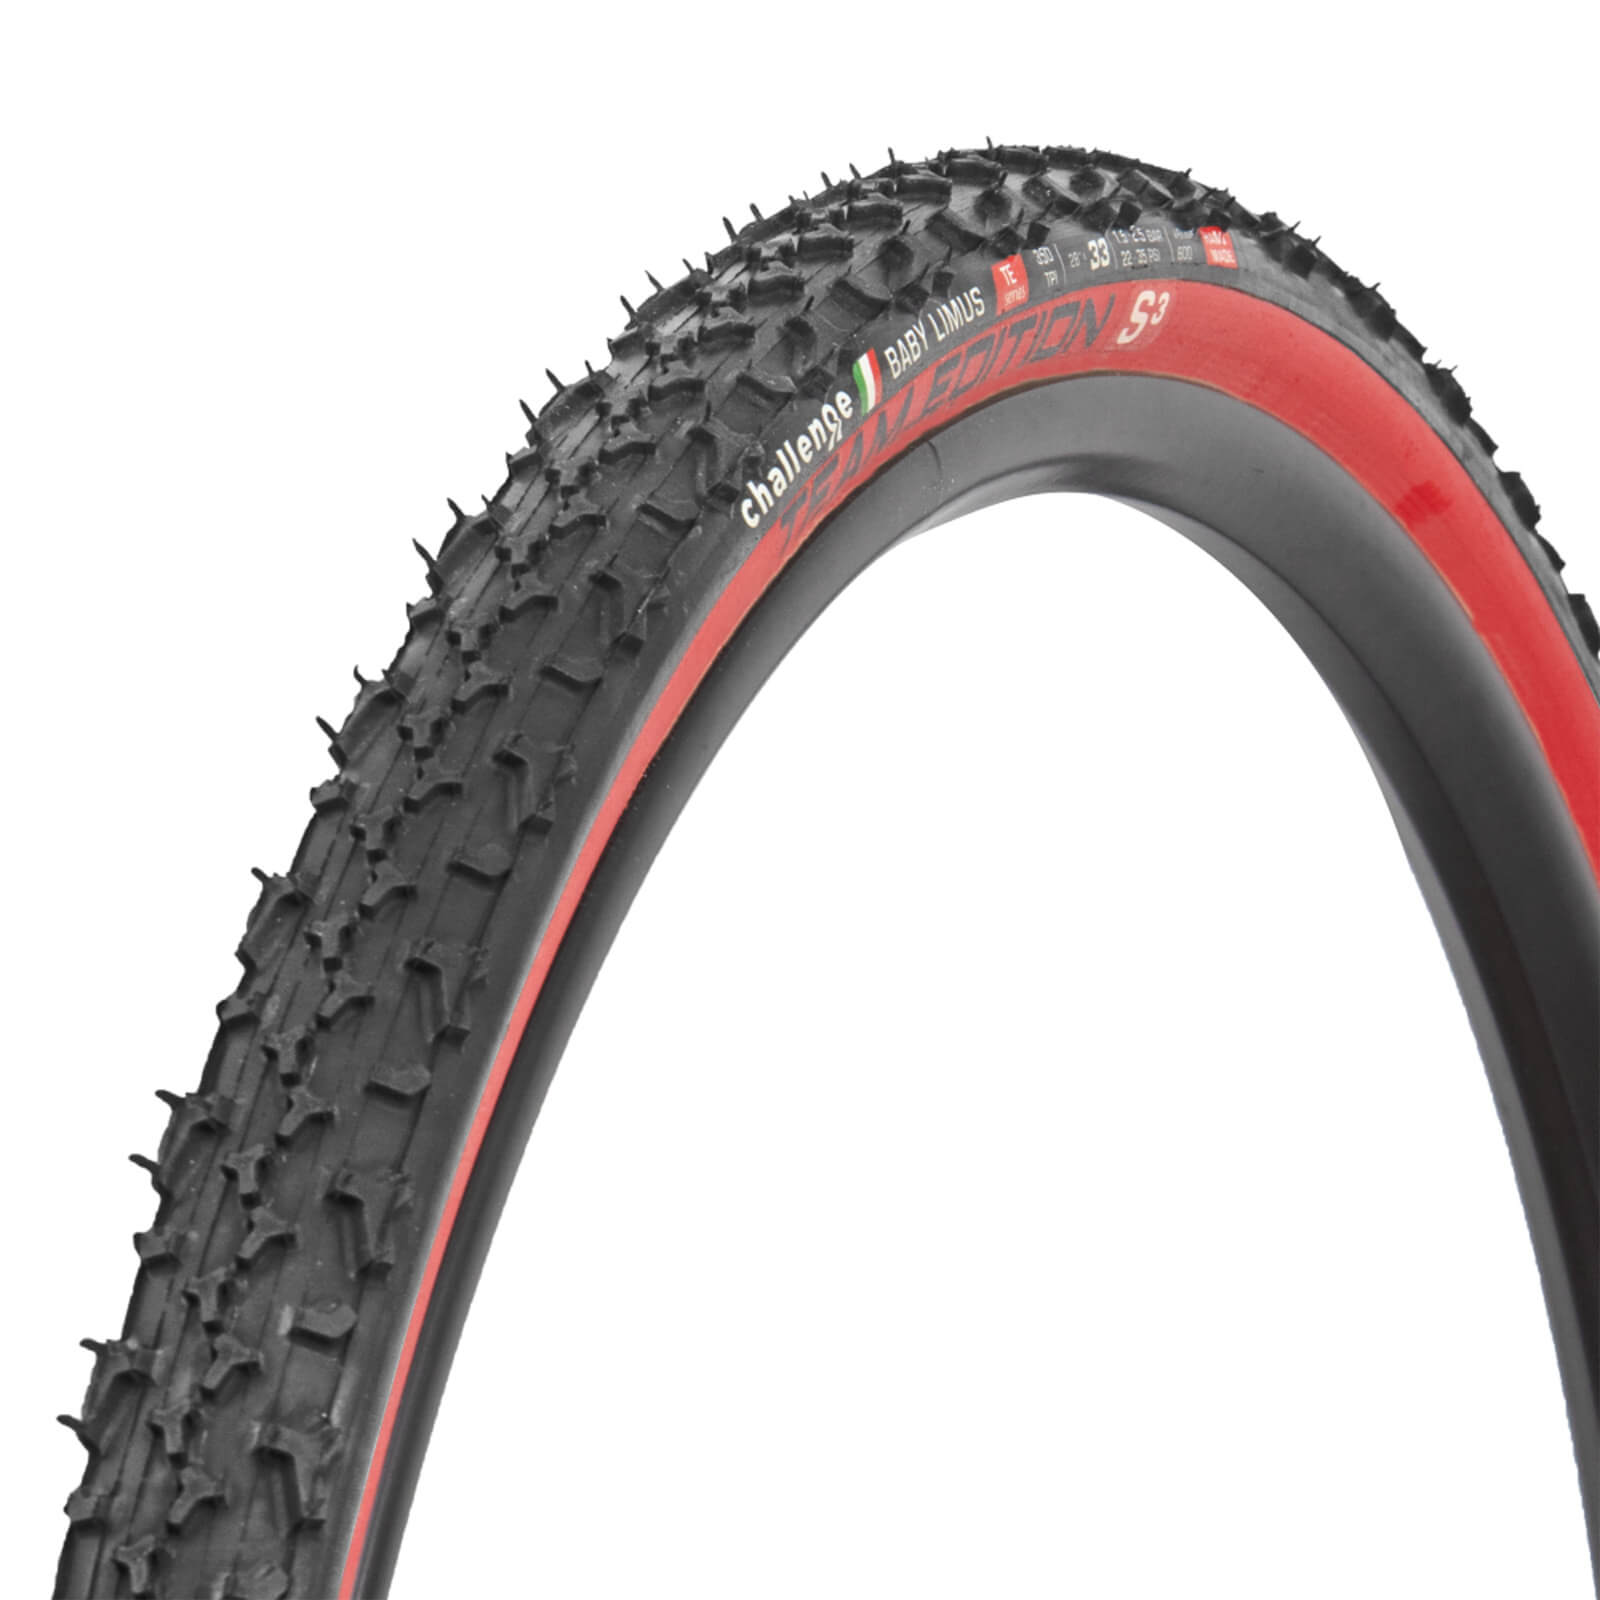 Challenge Baby Limus-TE Special Edition Handmade Tubular CX Tyre - 700x33c - Rot